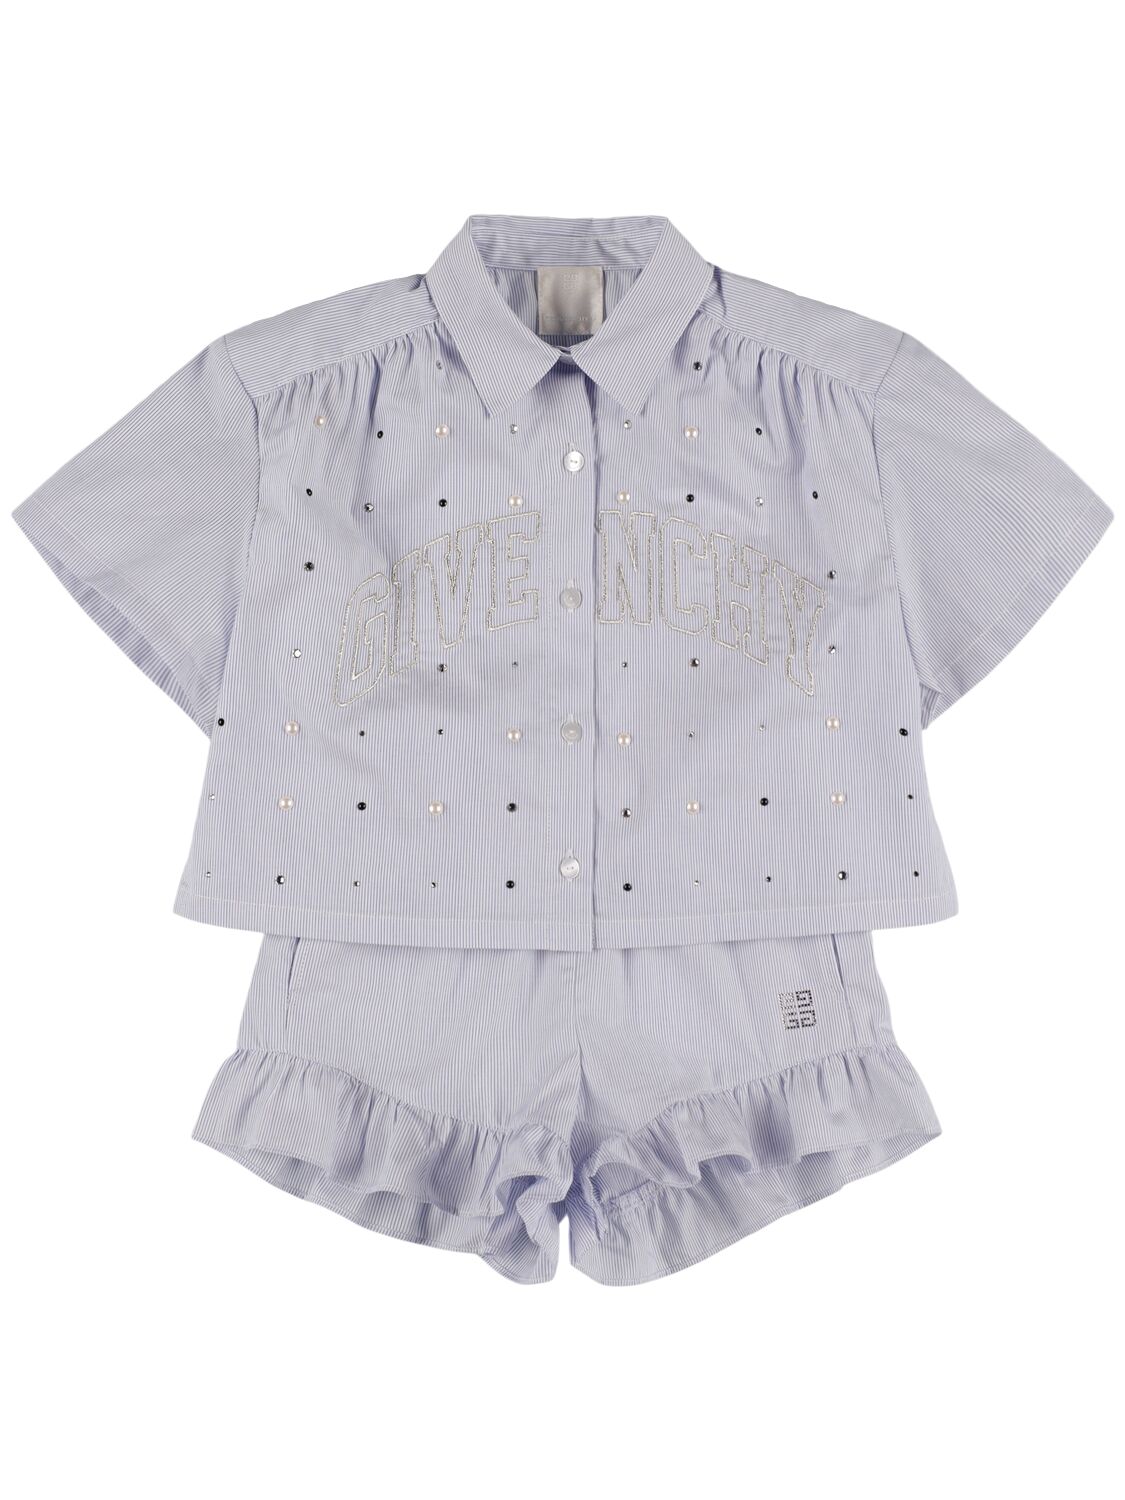 Givenchy Striped Cotton Shirt & Shorts In Blue